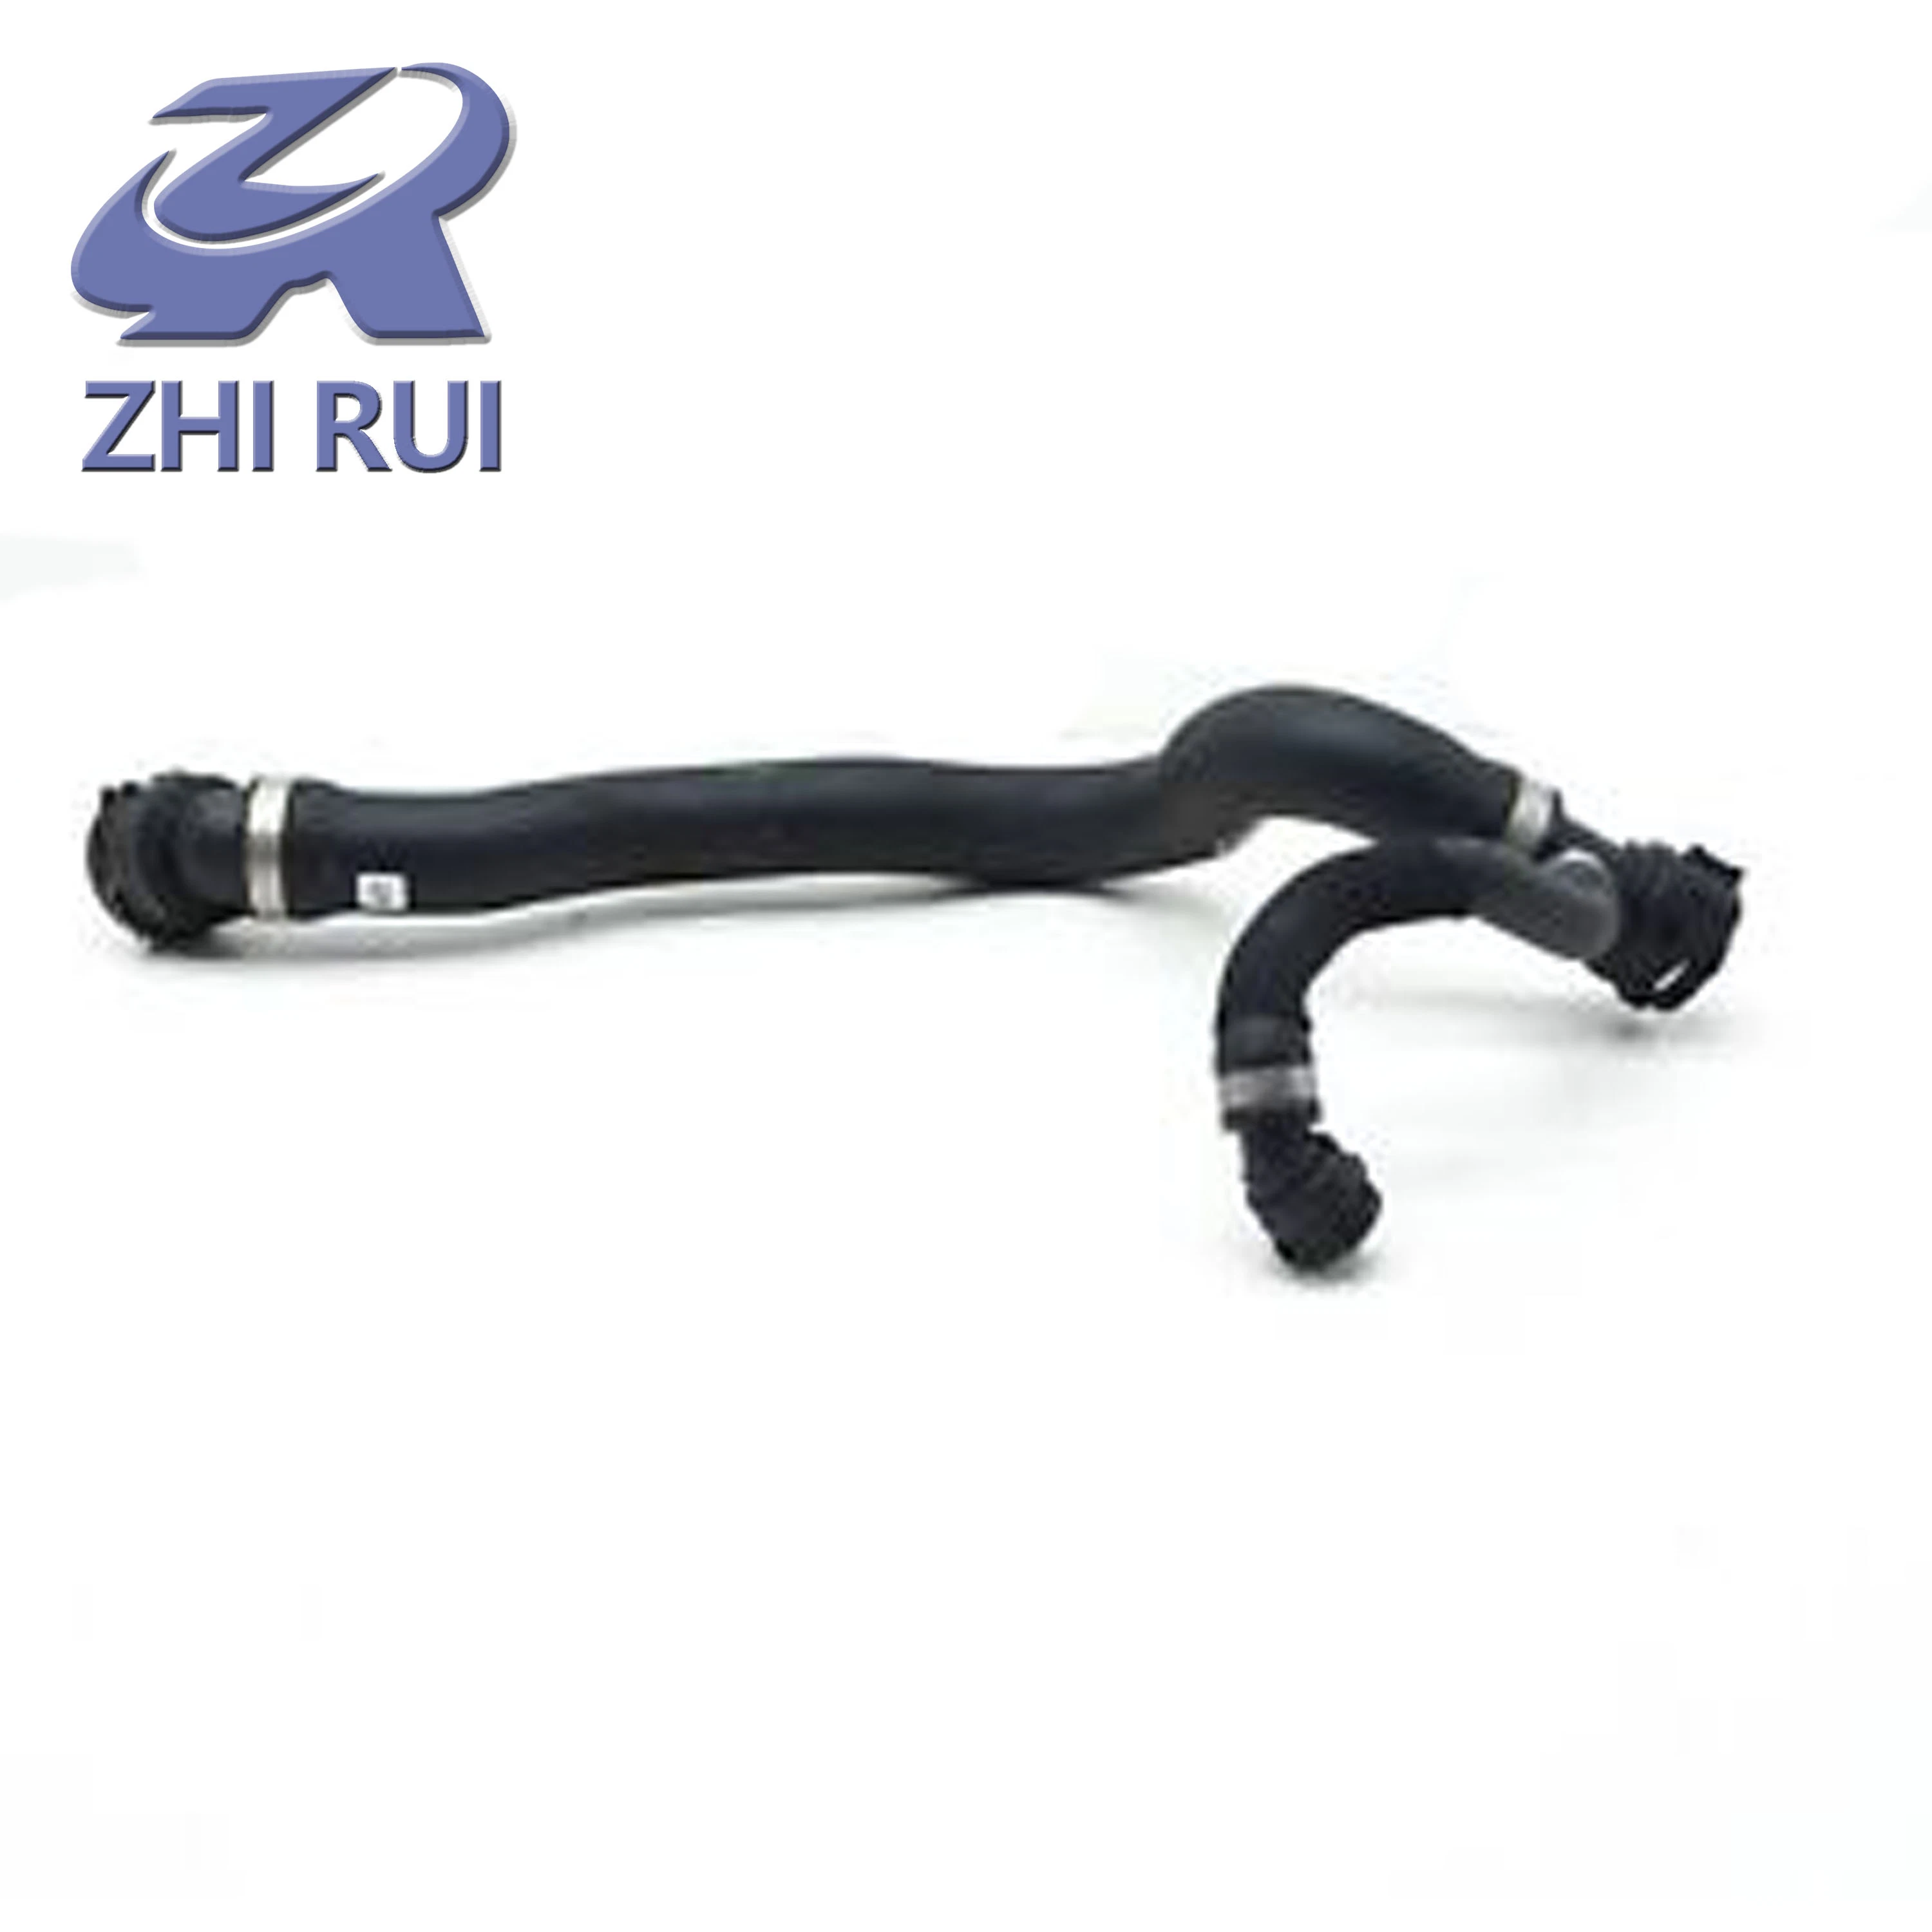 1712 9797 615 Auto Engine Parts Automobile Engine Structure Cooling System Water Pipe for BMW Xdrive25I M Xdrive25I OEM 17129797615